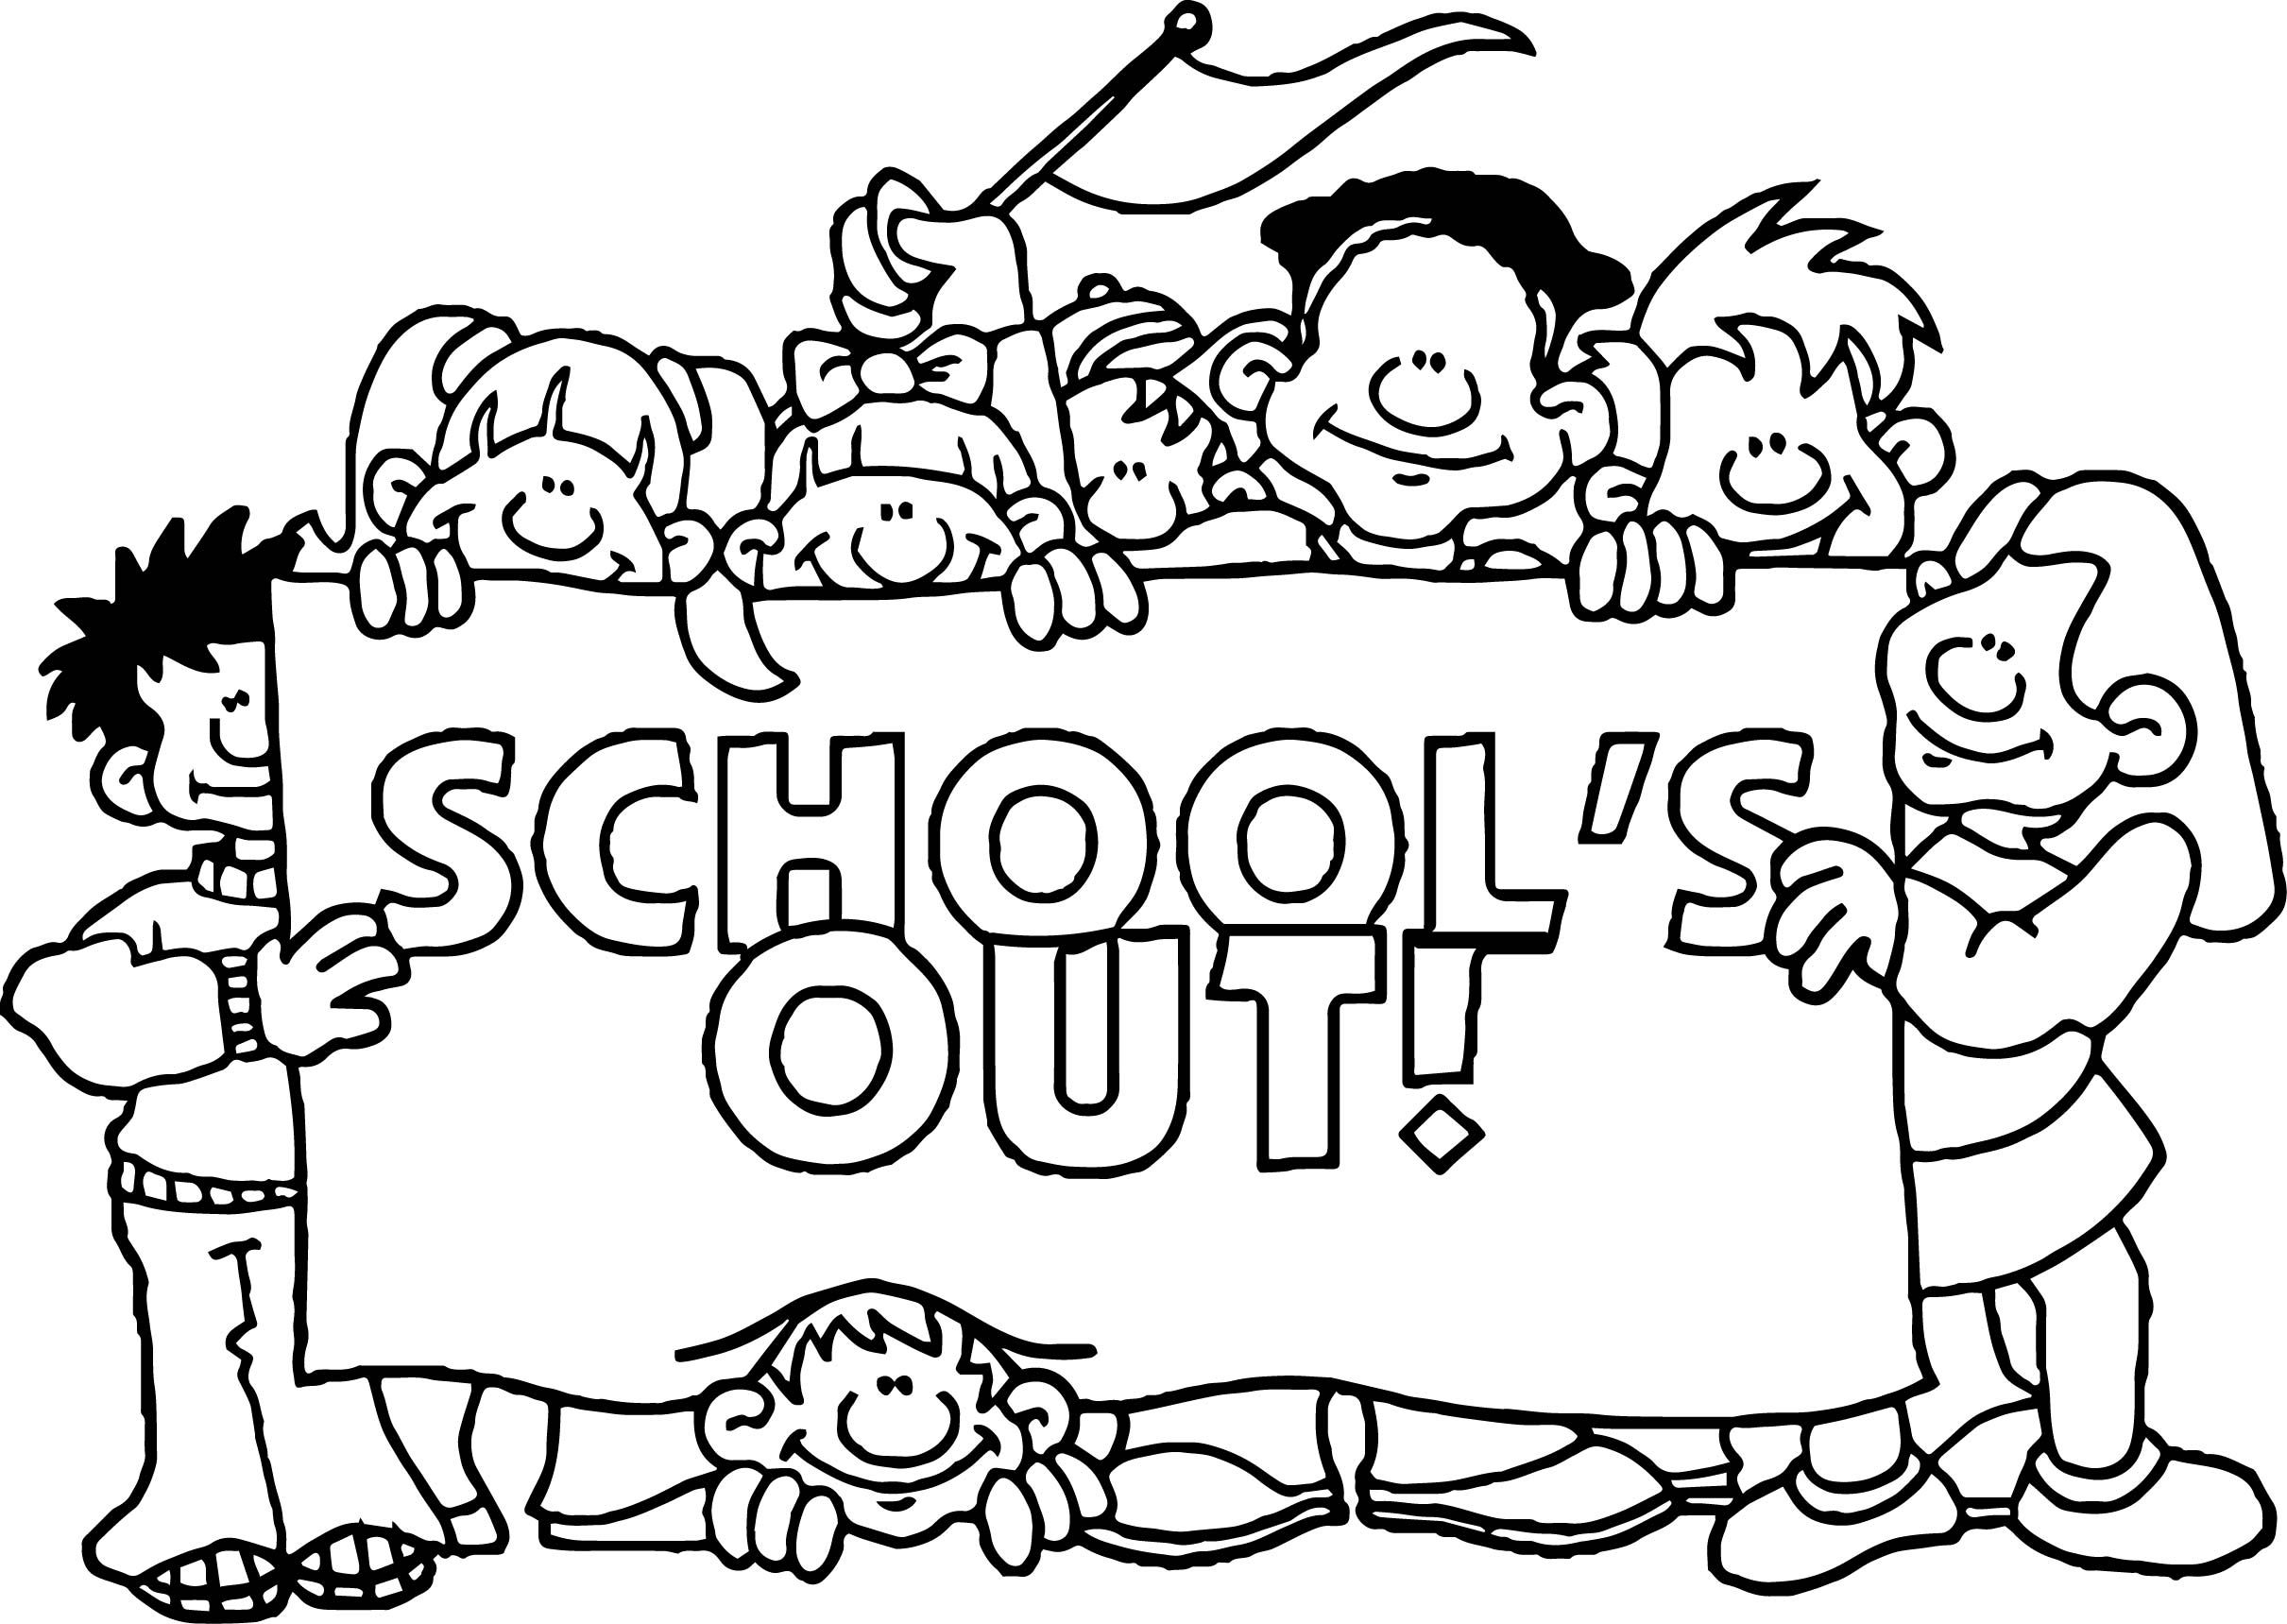 Summer Schools Out Coloring Page - Wecoloringpage.com | School coloring  pages, Coloring pages, Summer coloring pages